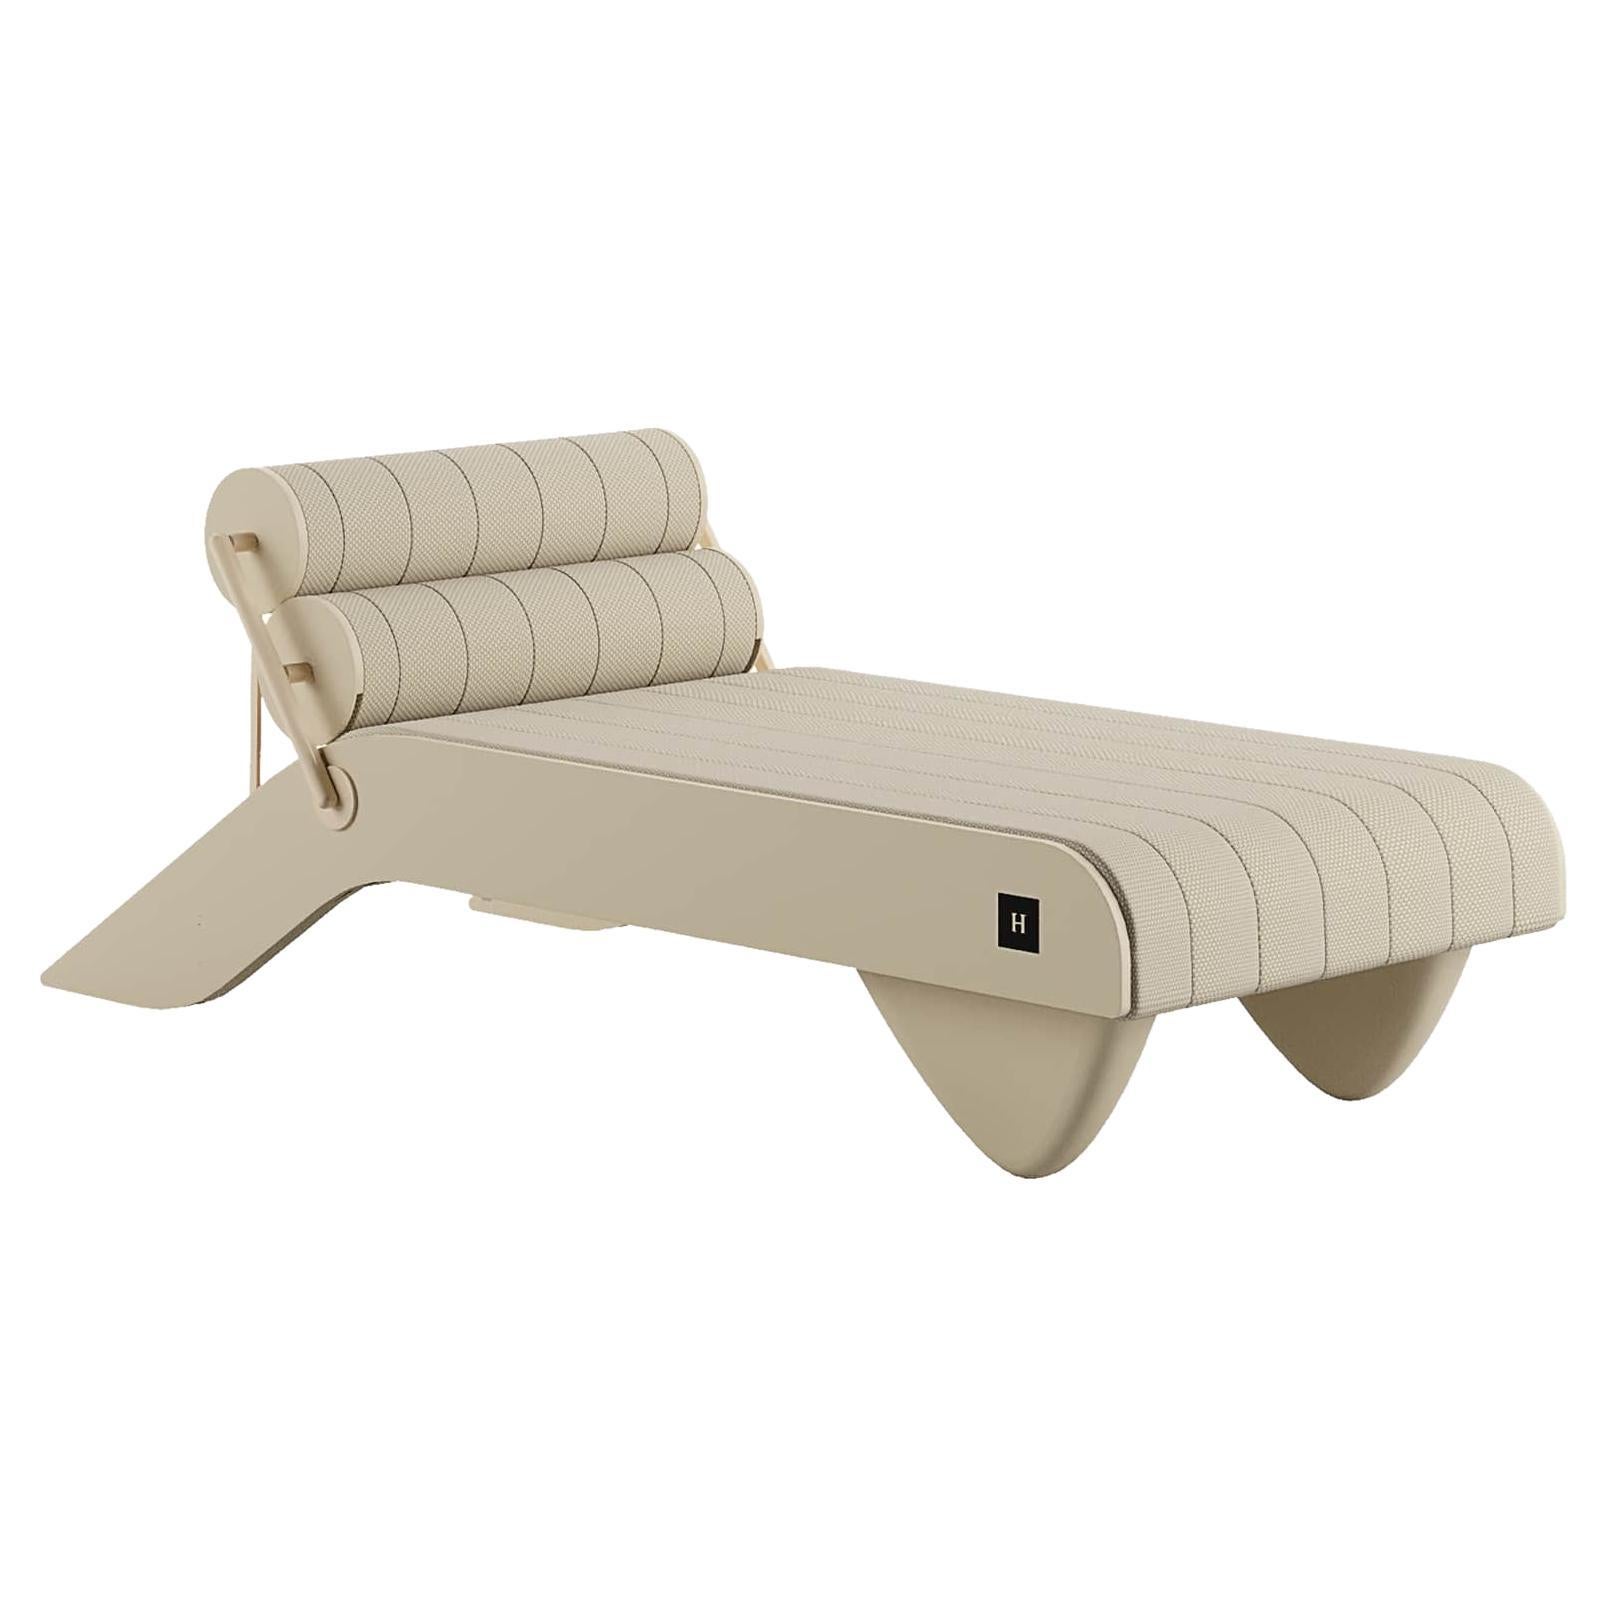 Modern Outdoor Reclining Daybed Sun Lounger Upholstered Beige Stripes